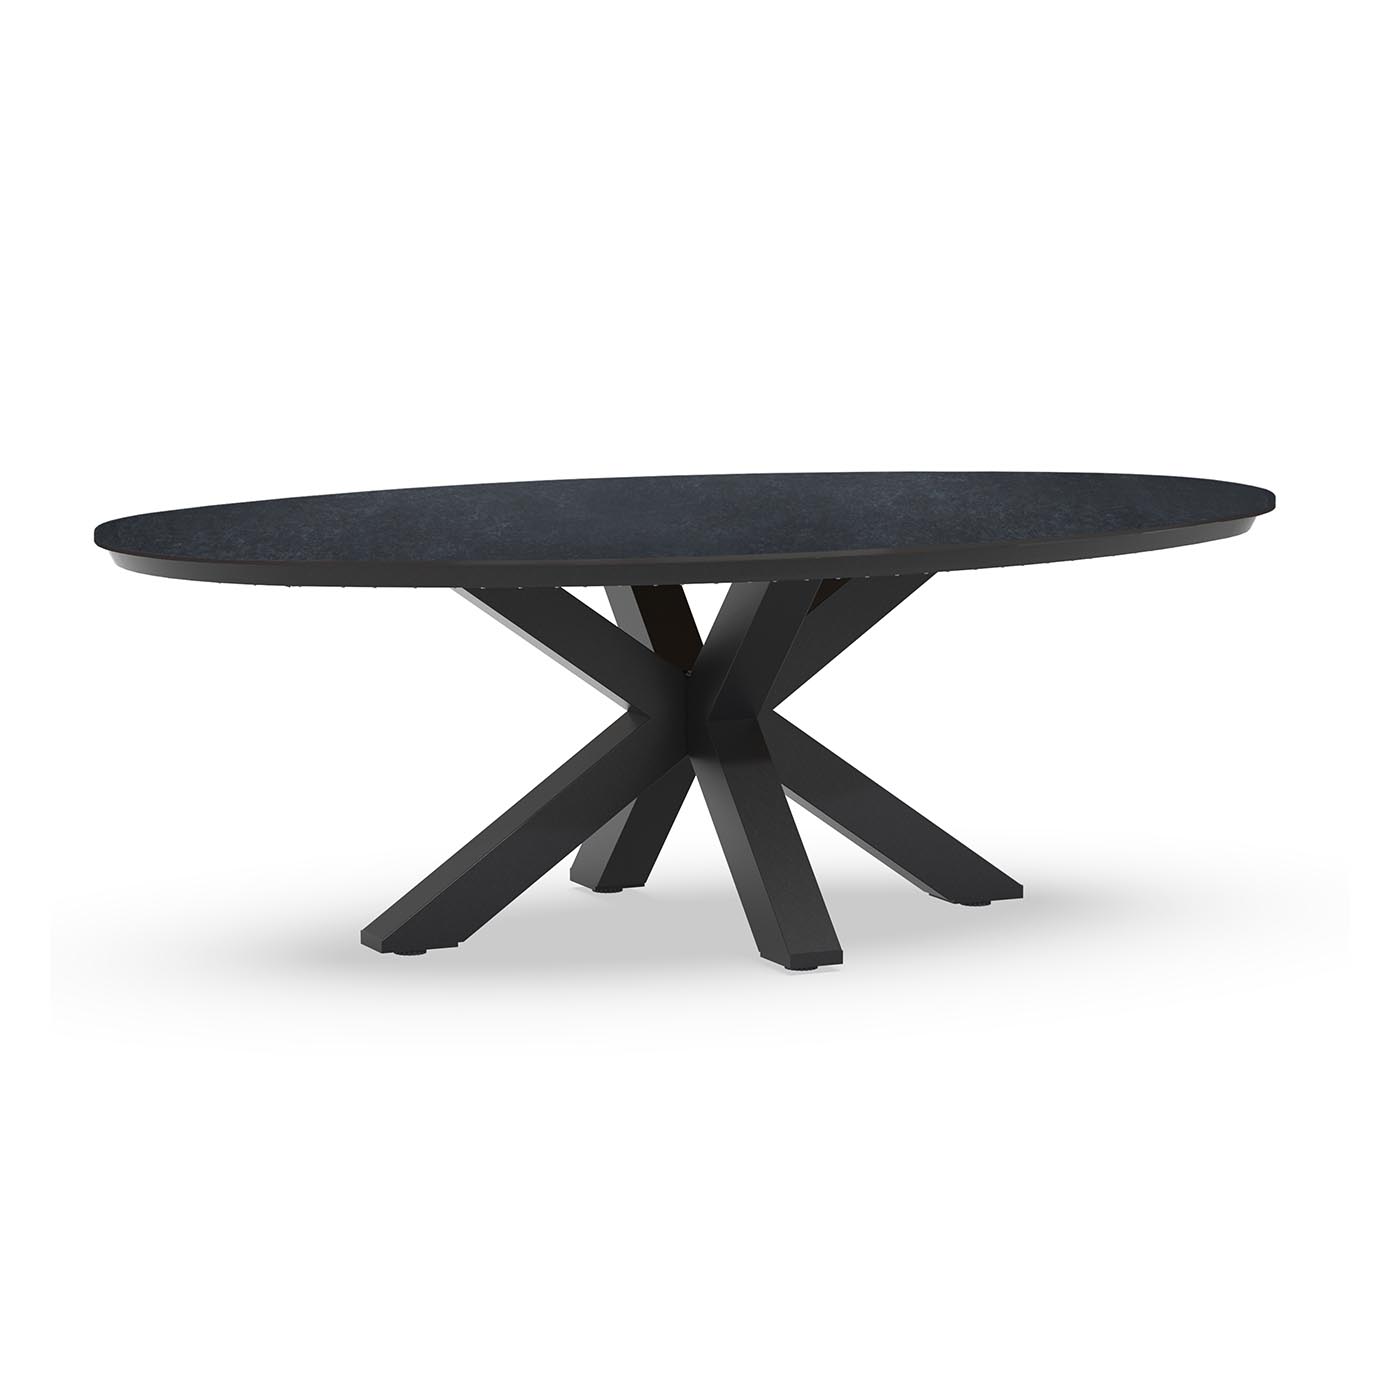 Oblong Dining Table Trespa Graphite 220 x 130 cm Charcoal